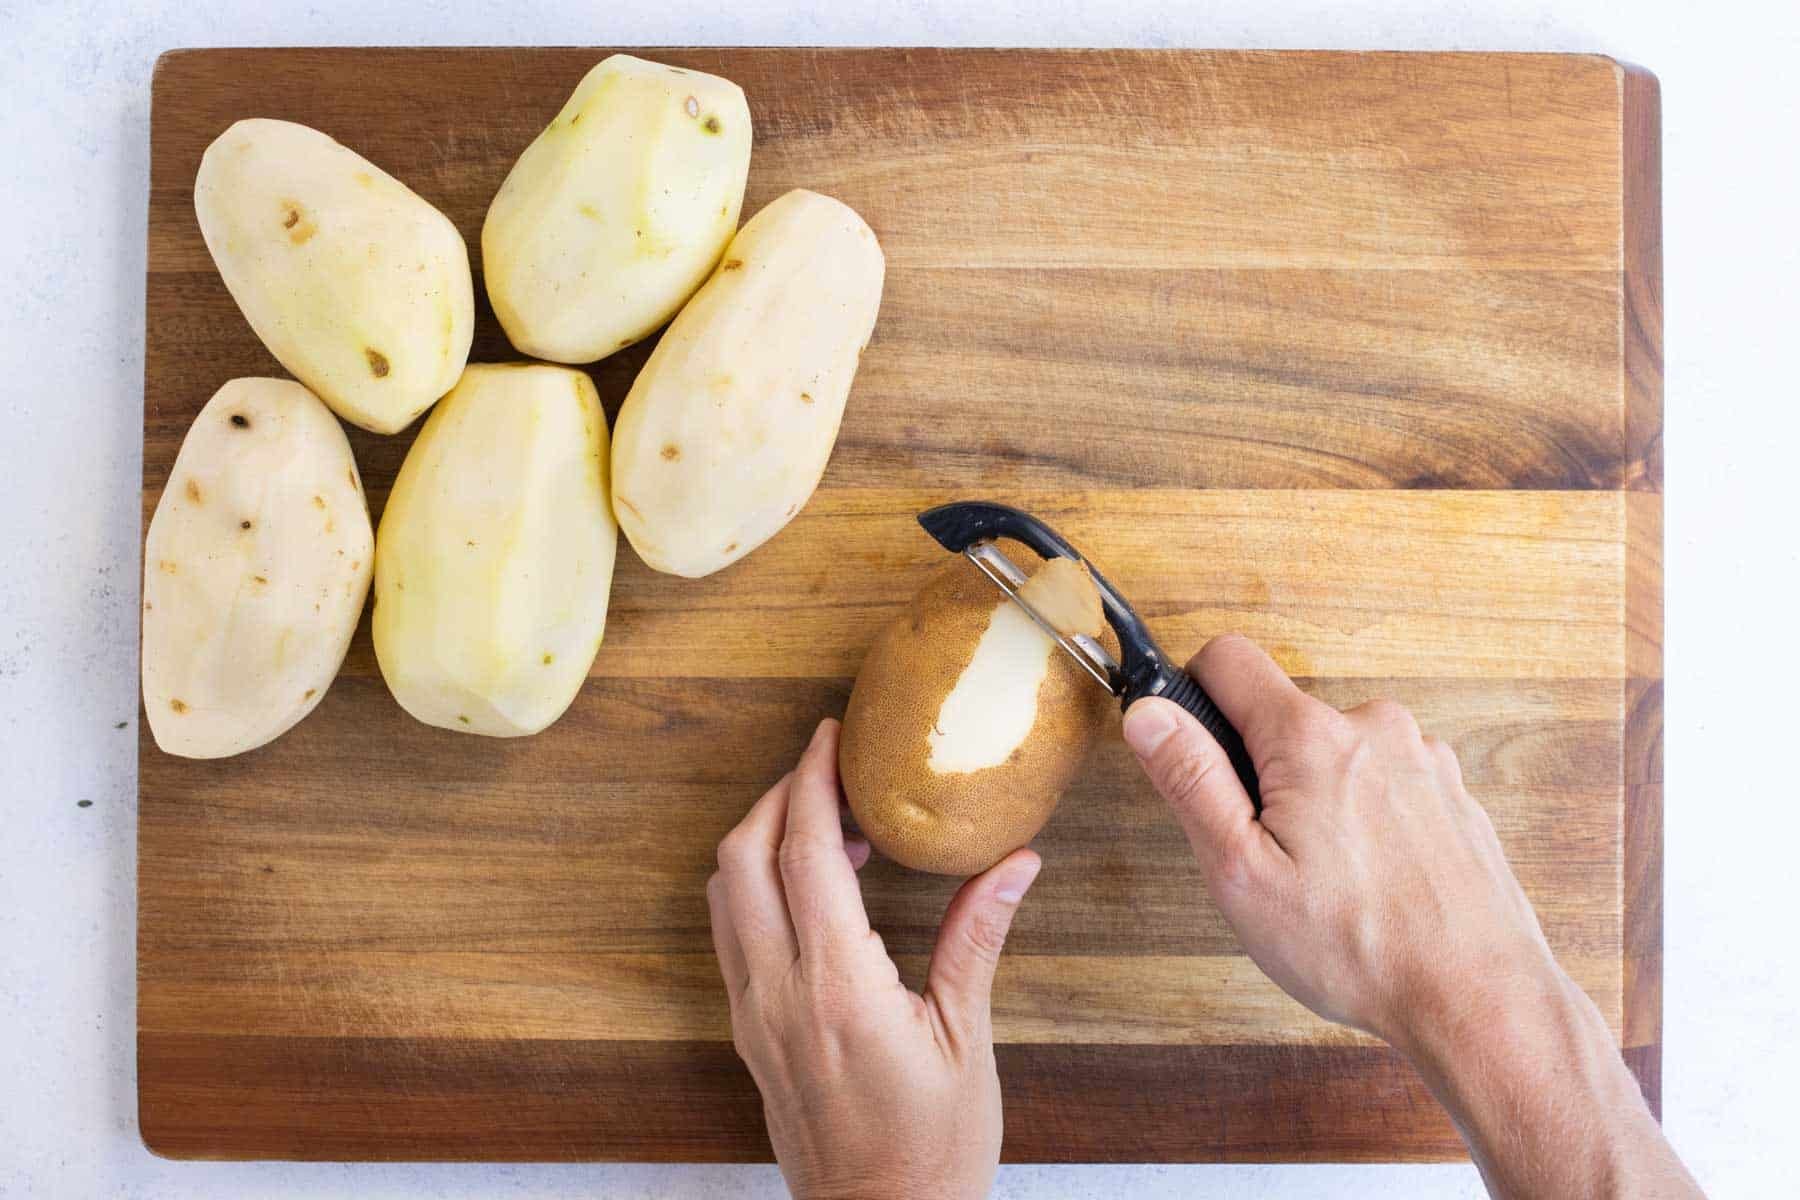 A vegetable peeler removes the skin from potatoes.